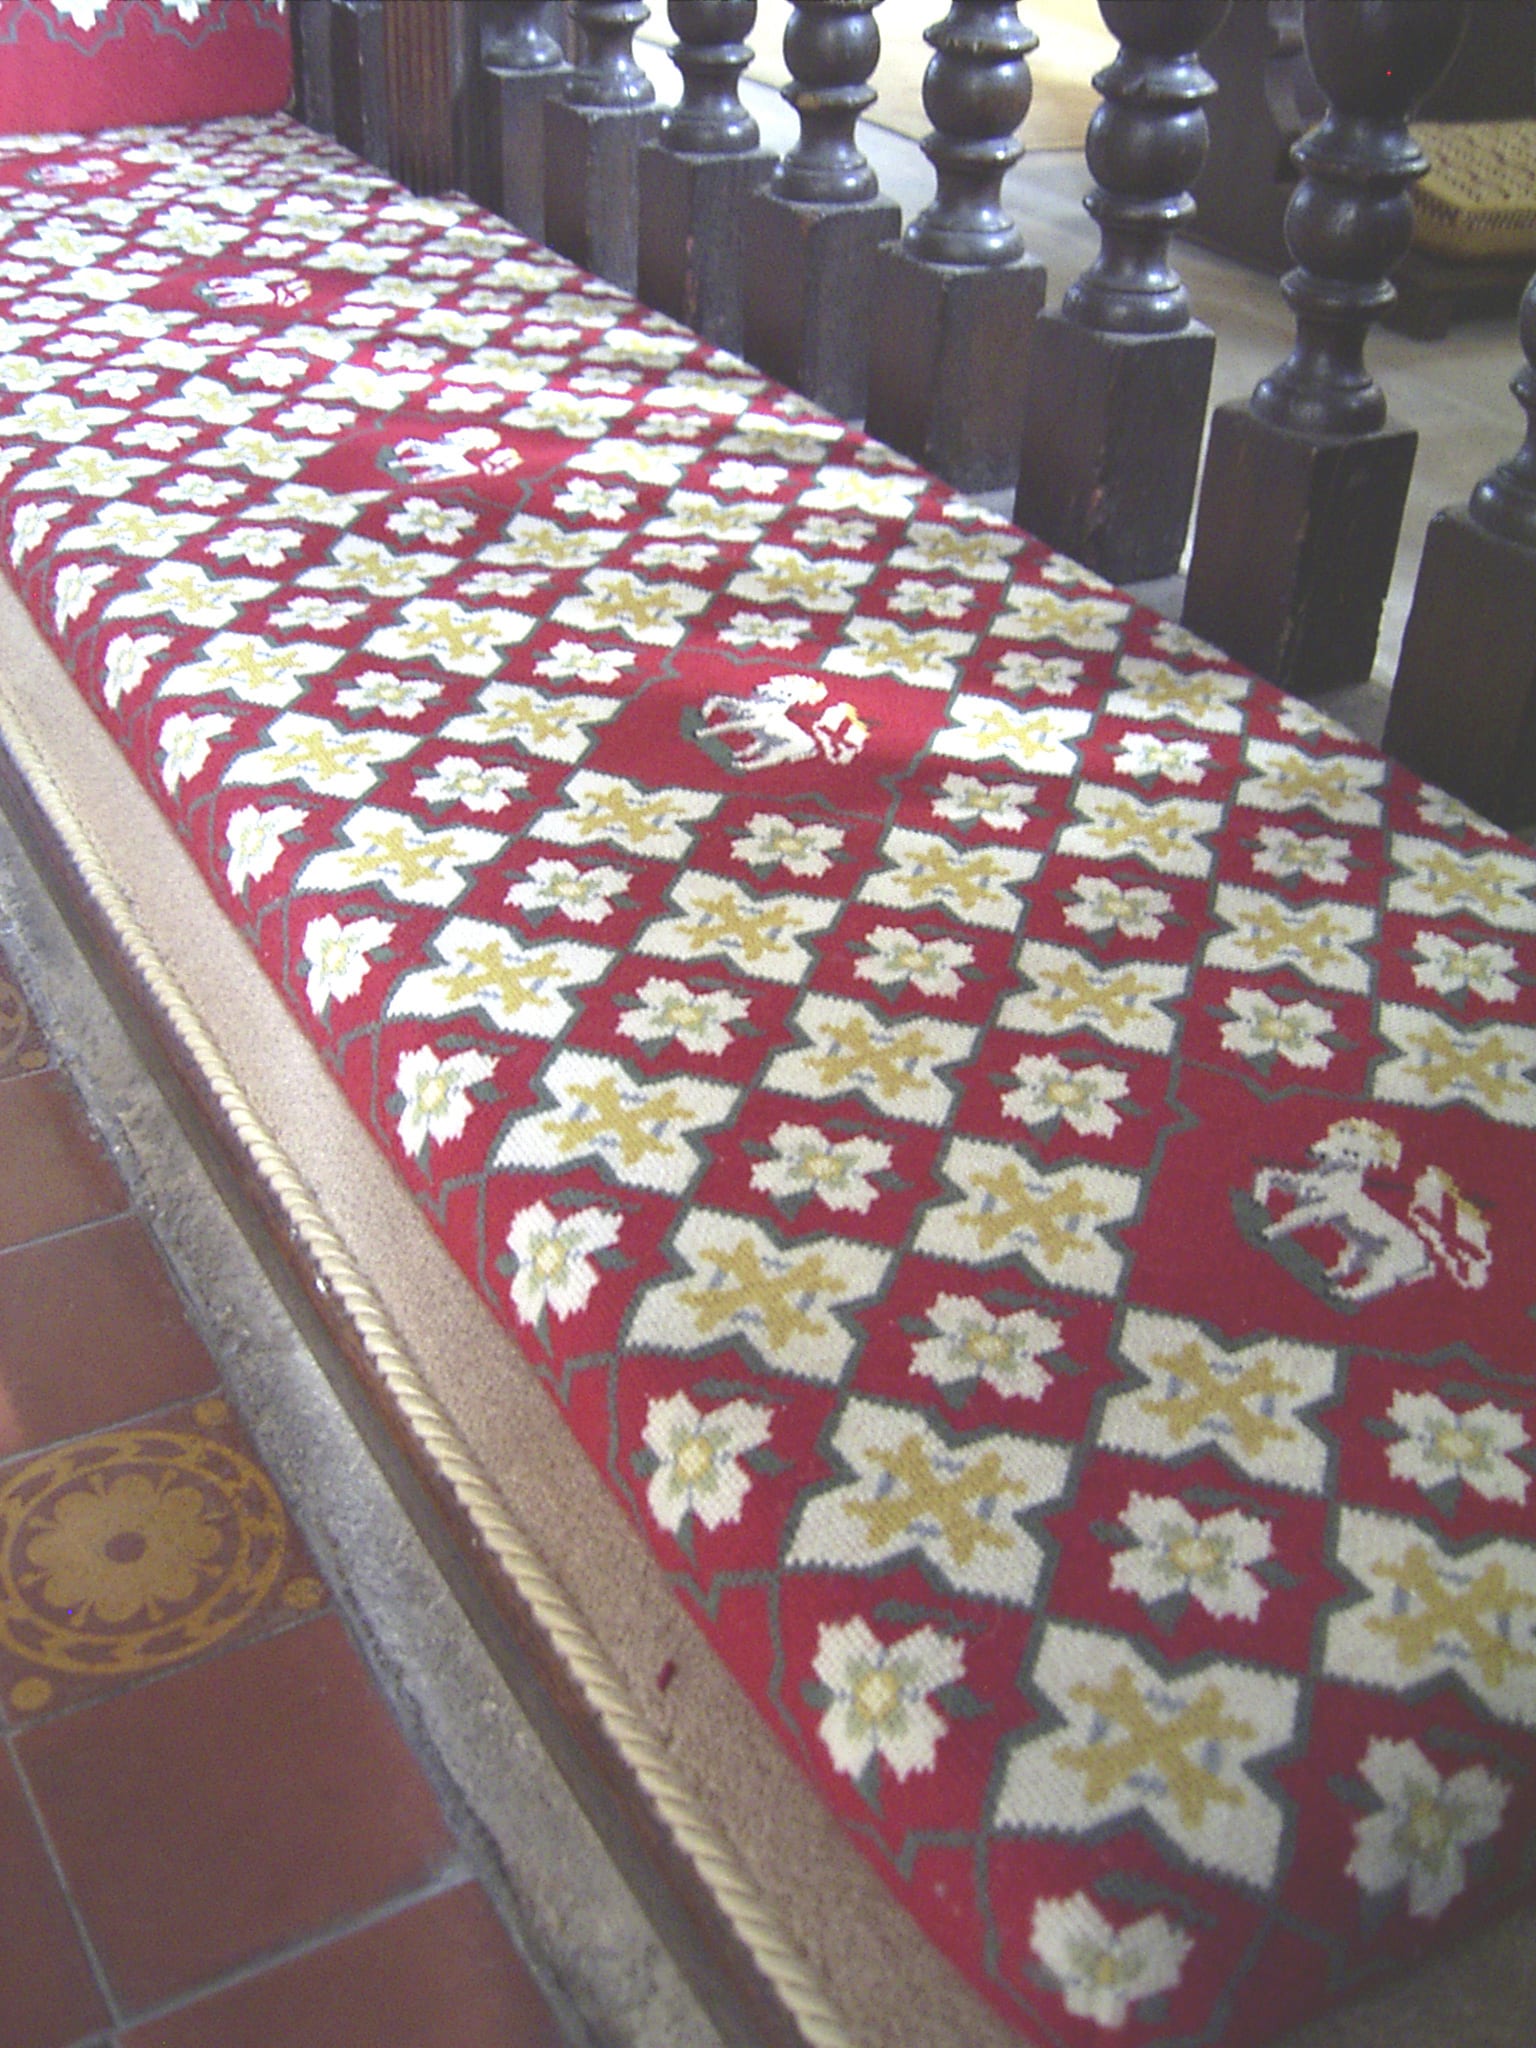 carpet edge binding used to adorn a pew seat